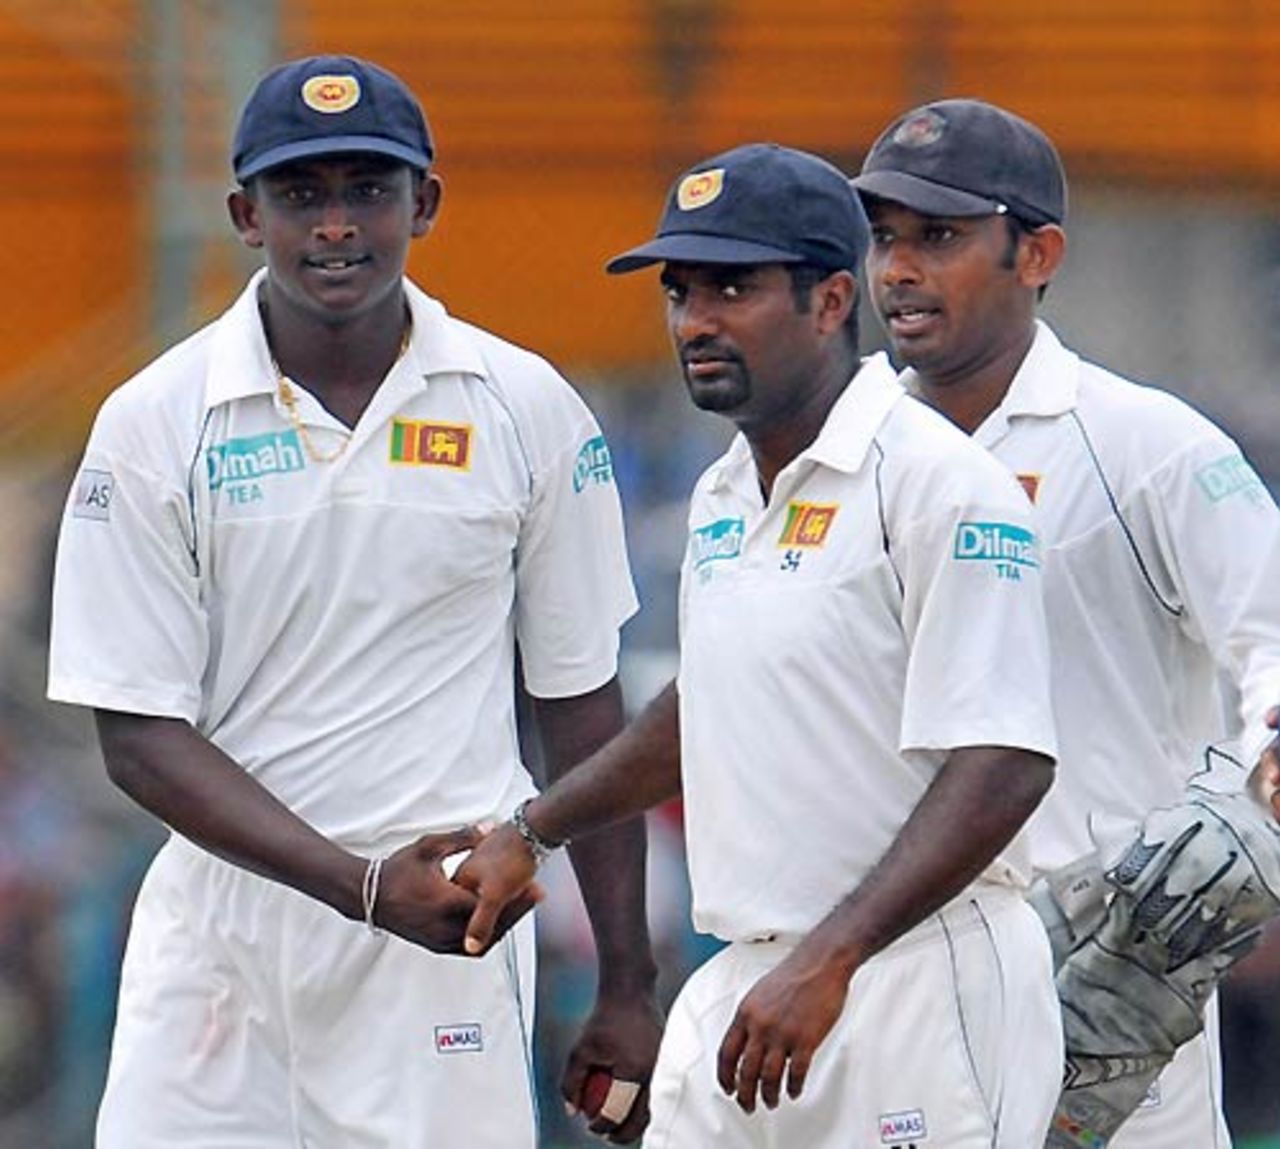 Ajantha Mendis is congratulated by Muttiah Muralitharan for his ten-wicket haul, Sri Lanka v India, 2nd Test, Galle, 4th day, August 3, 2008